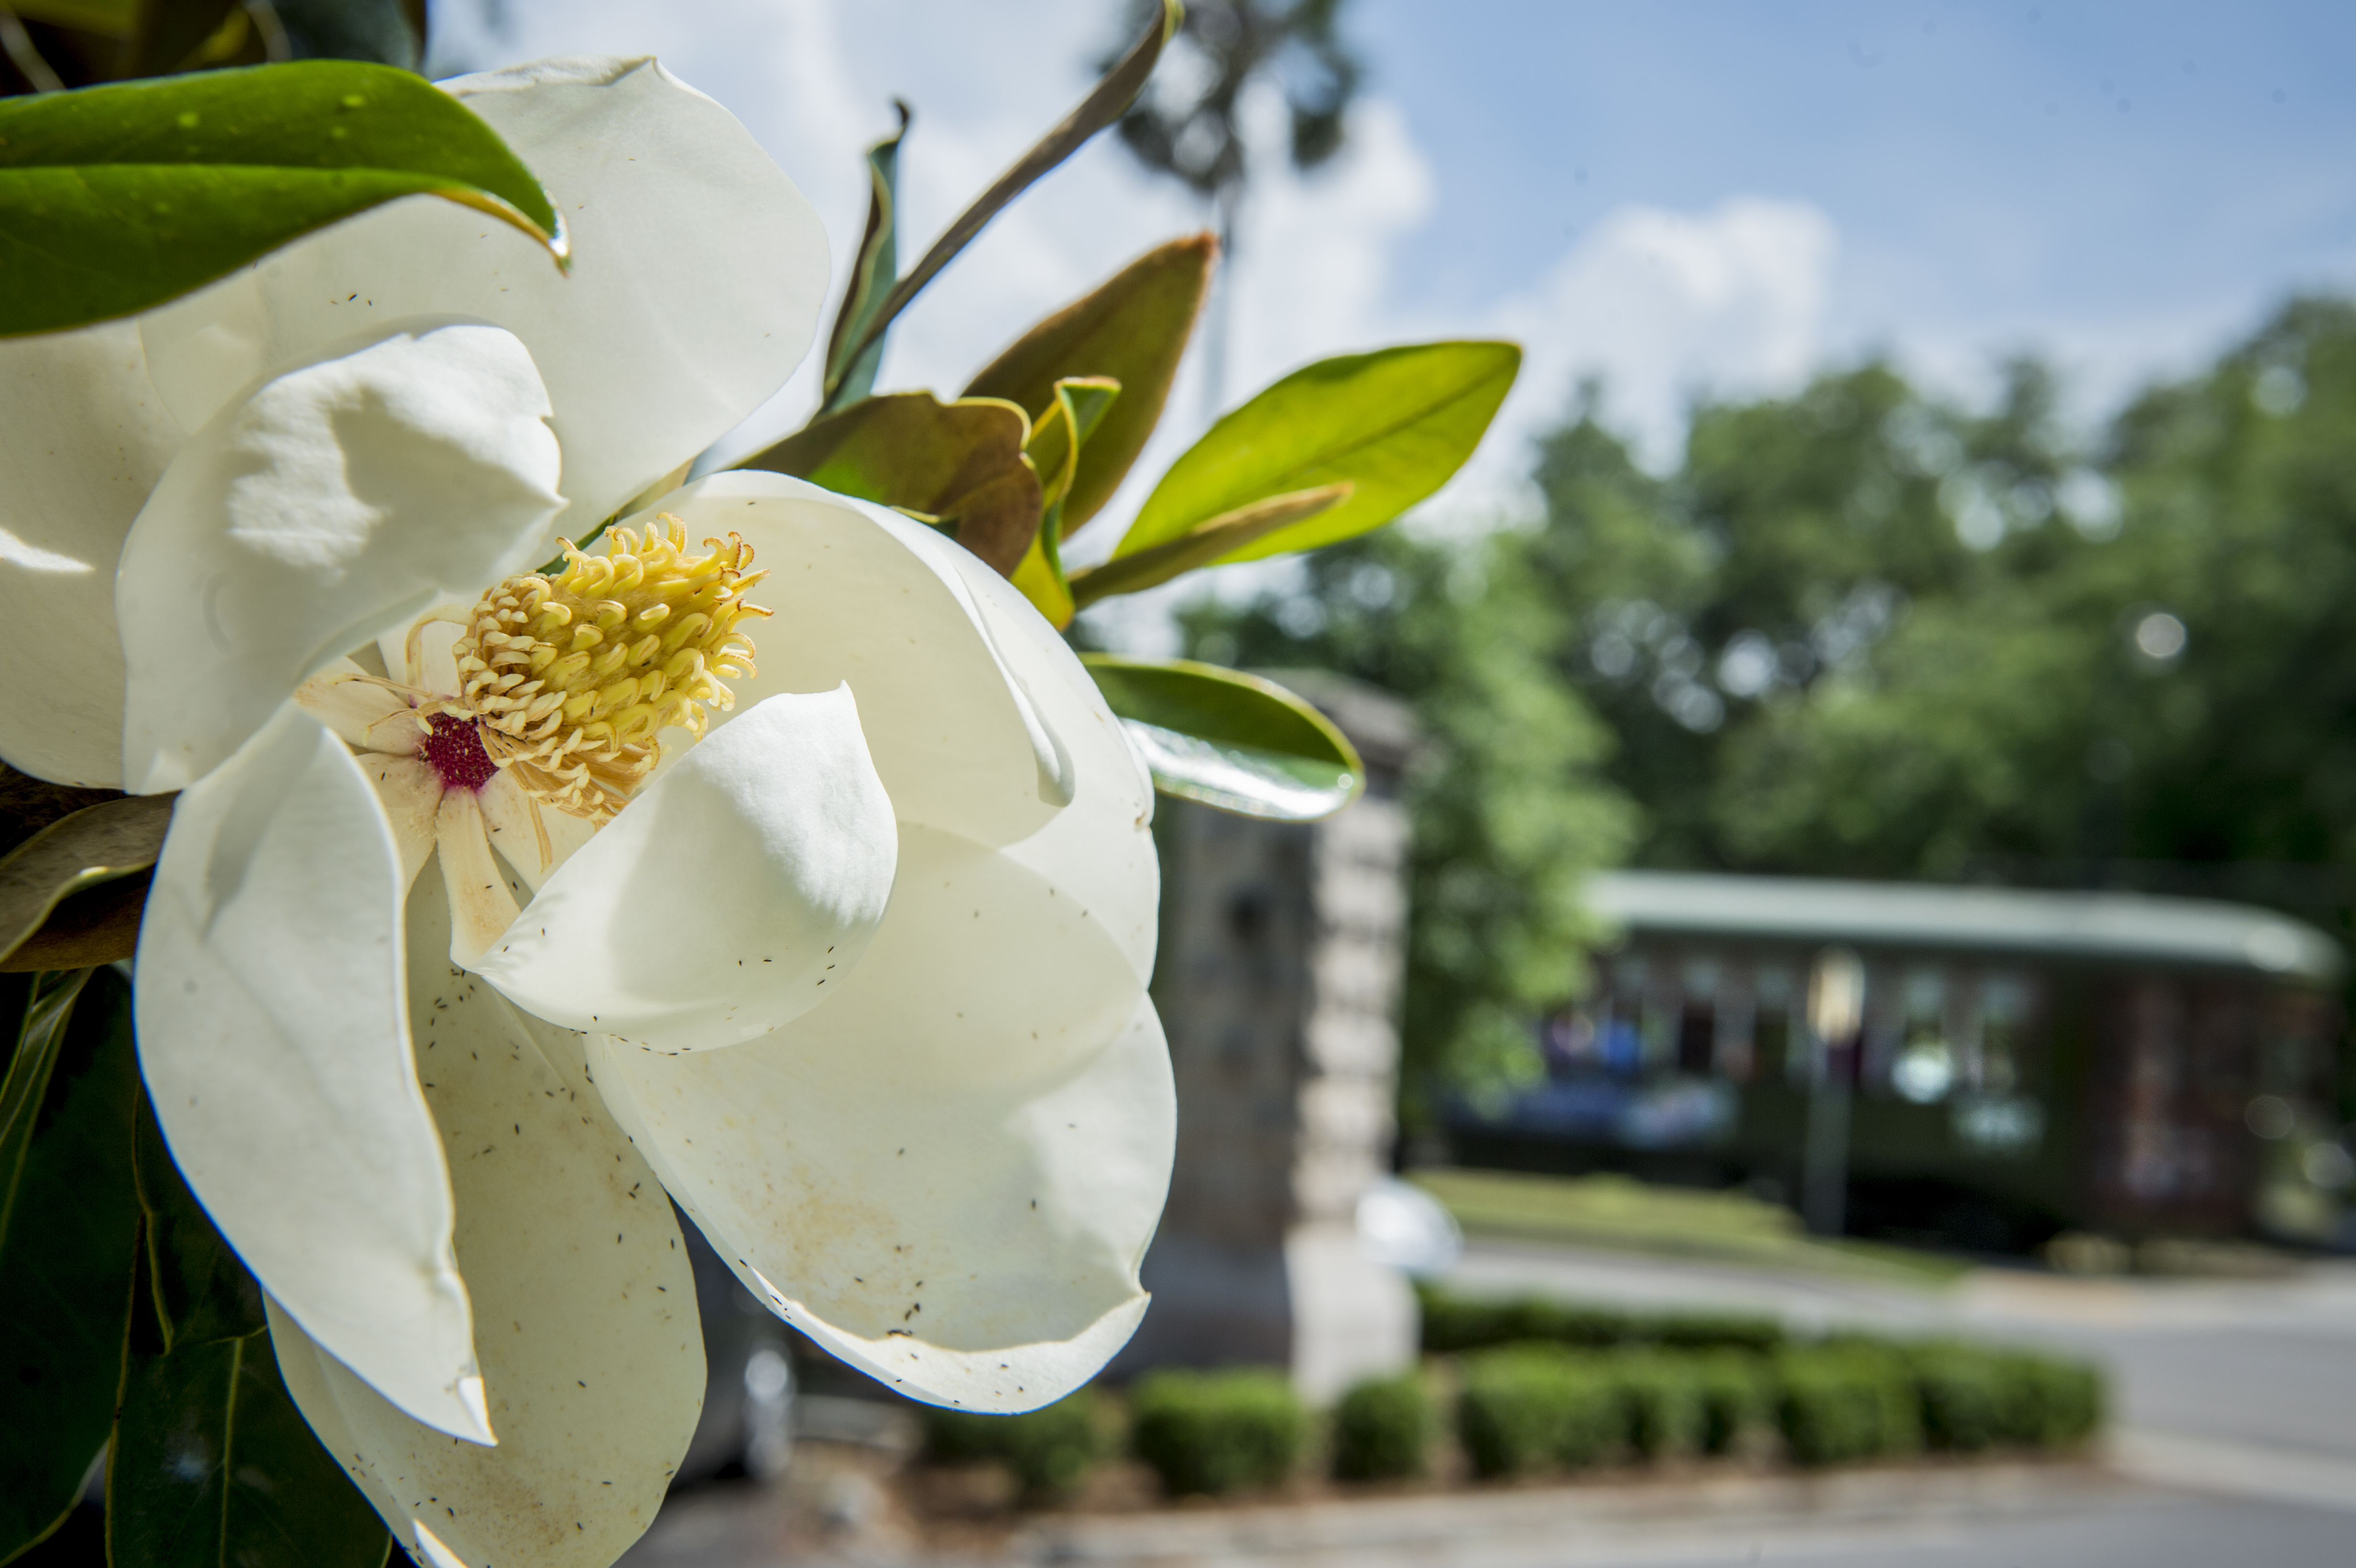 Magnolia flower with St. Charles Streetcar running in the background.